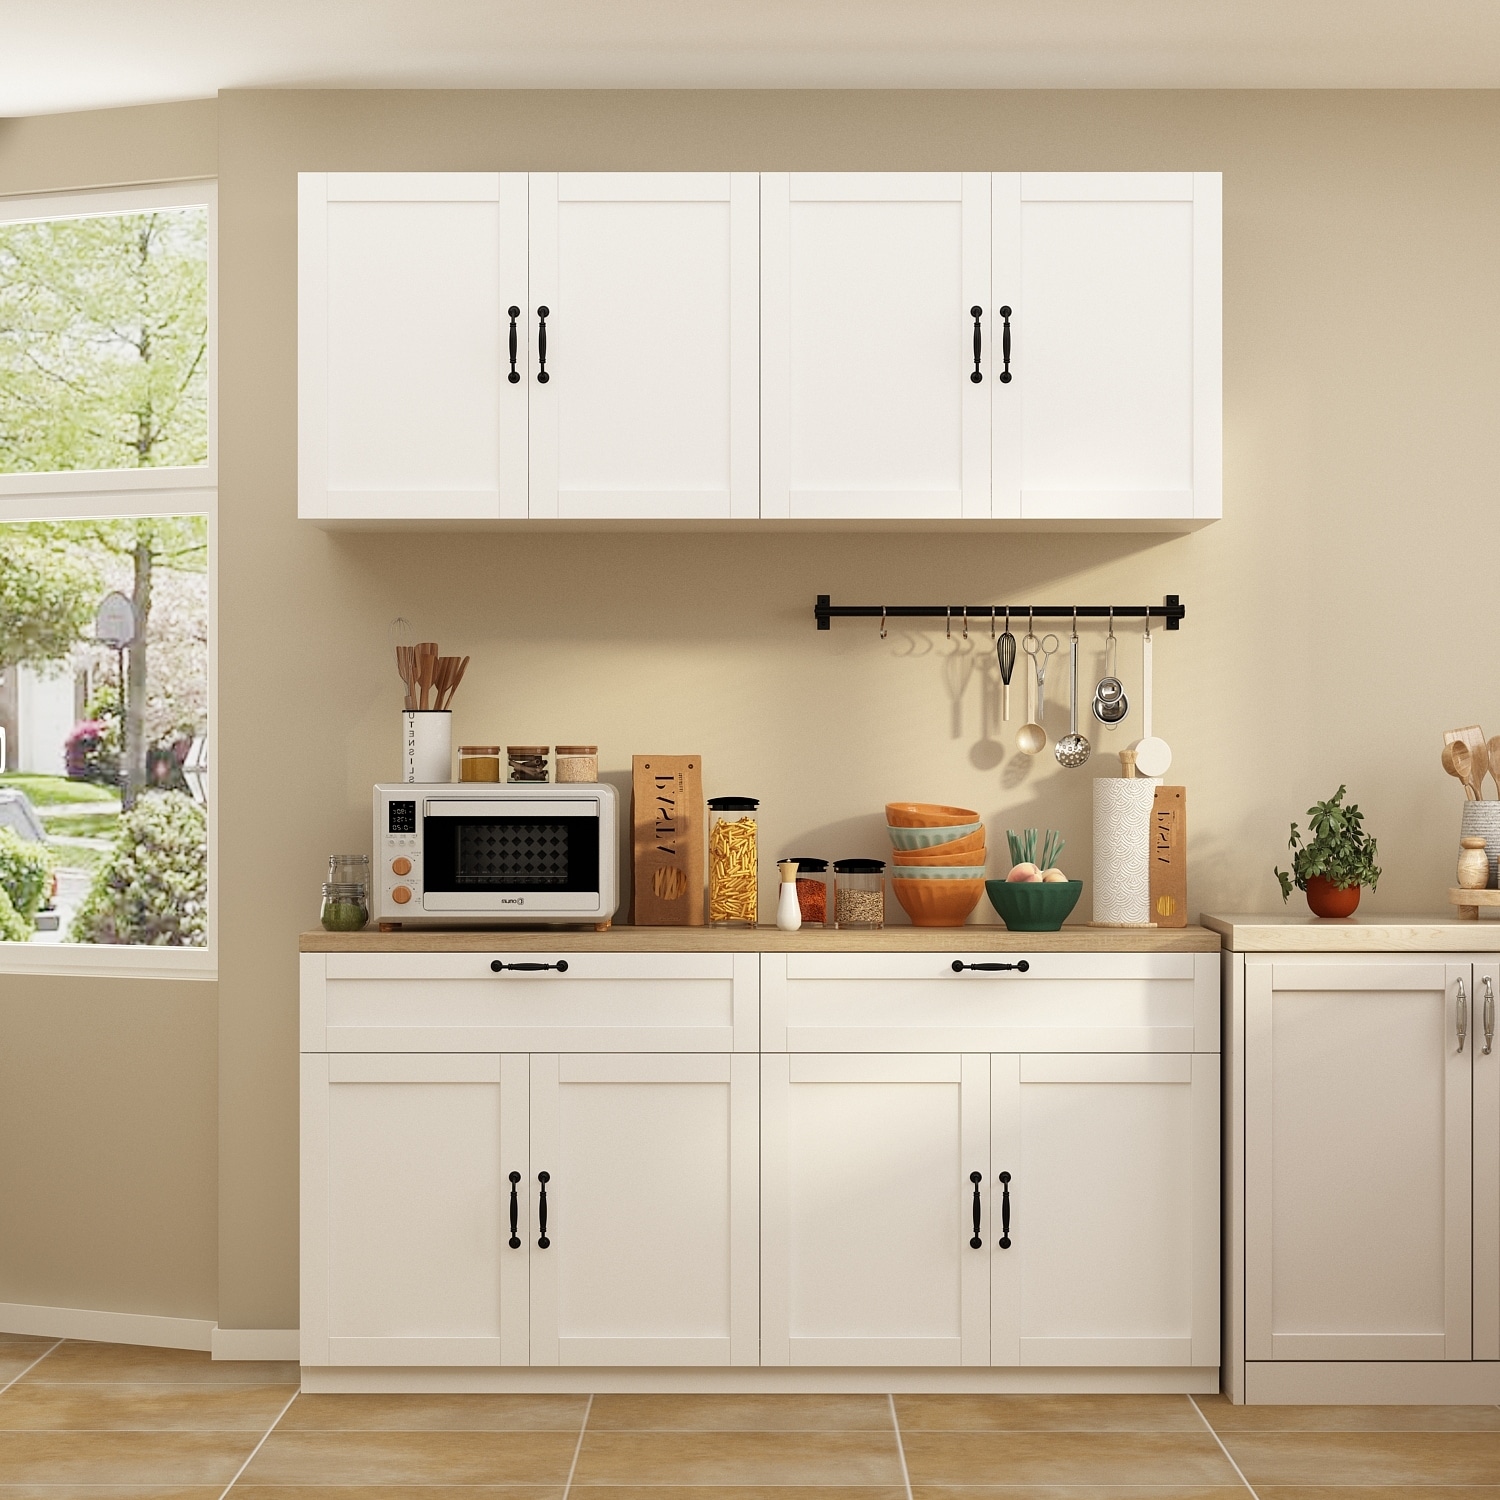 https://ak1.ostkcdn.com/images/products/is/images/direct/53c49d9124884211e19664f7cb53234492a7d101/Storage-Cabinet-Kitchen-Pantry-Garage-Wall-Floor-and-Wall-Cabinet-Set.jpg